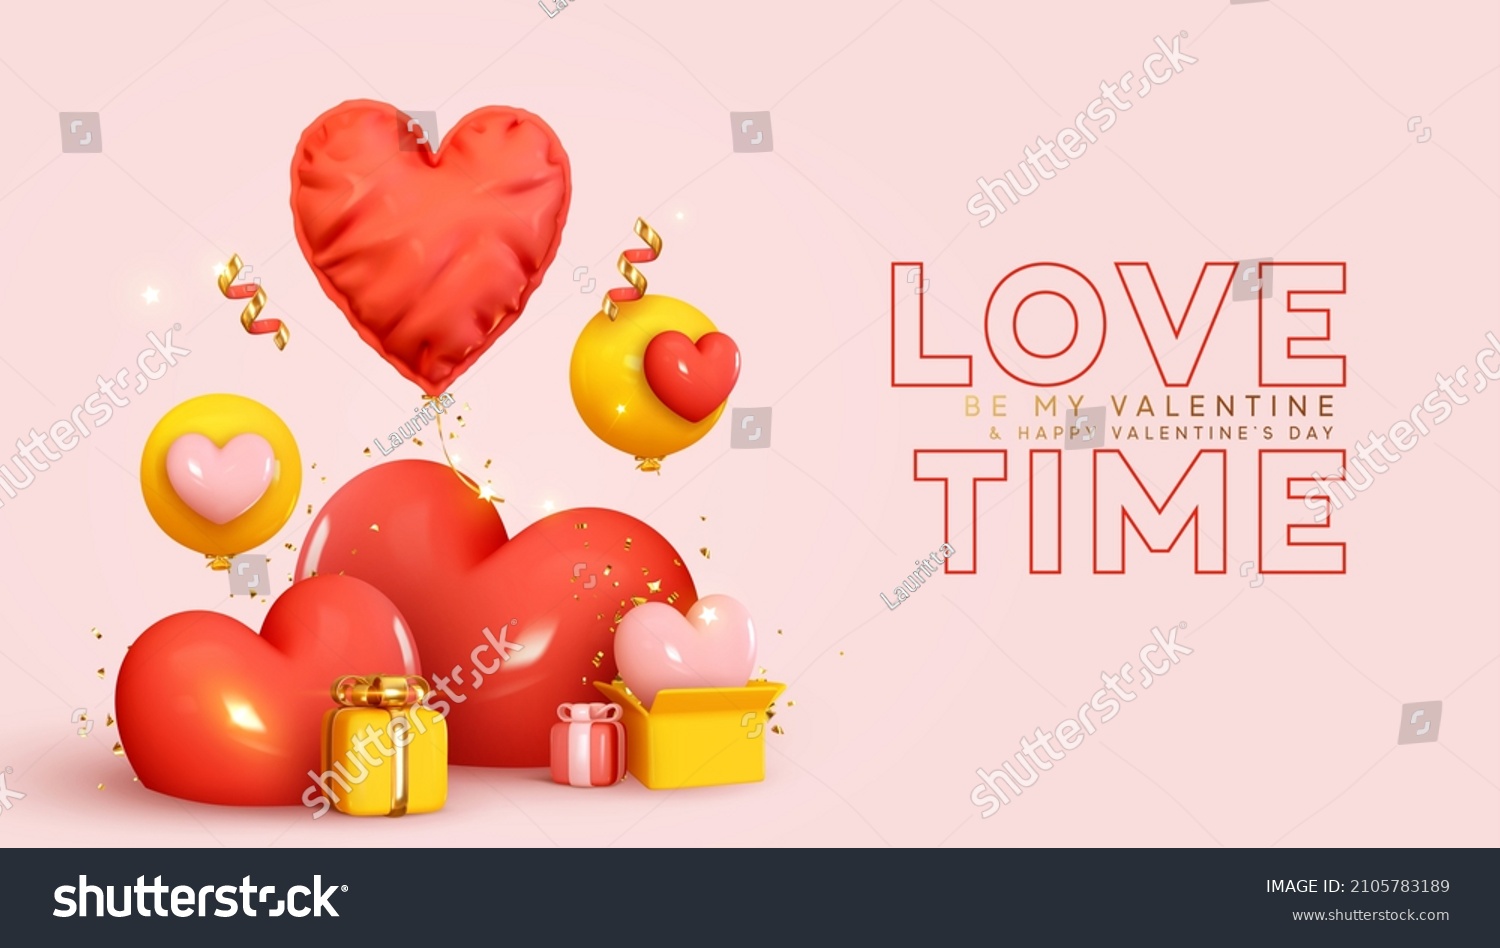 Happy Valentine's Day. Holiday wedding. happy birthday. Festive background with realistic heart shaped balloons red and yellow colors, open gift box. Romantic banner, web poster. Vector illustration #2105783189